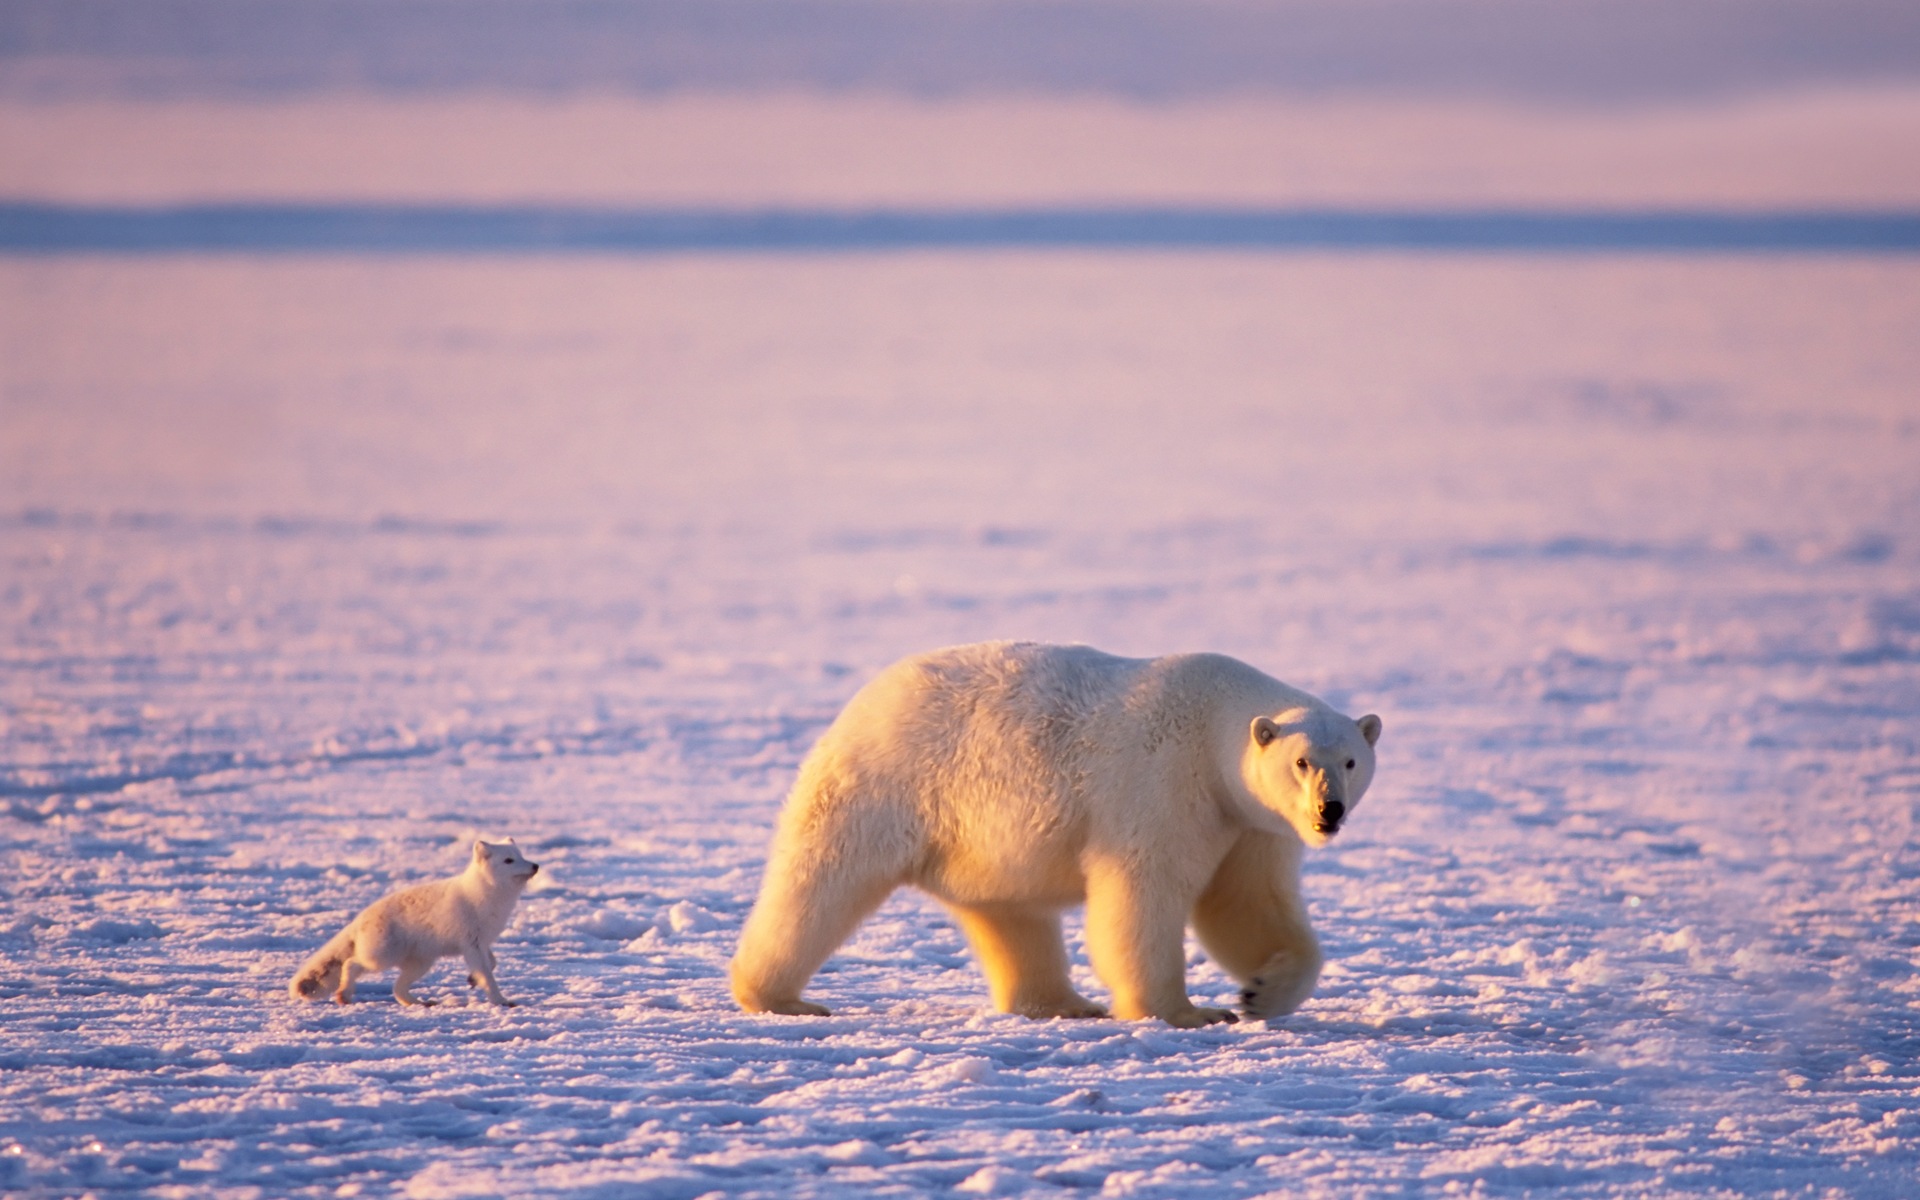 Windows 8 Wallpapers: Arctic, the nature ecological landscape, arctic animals #10 - 1920x1200